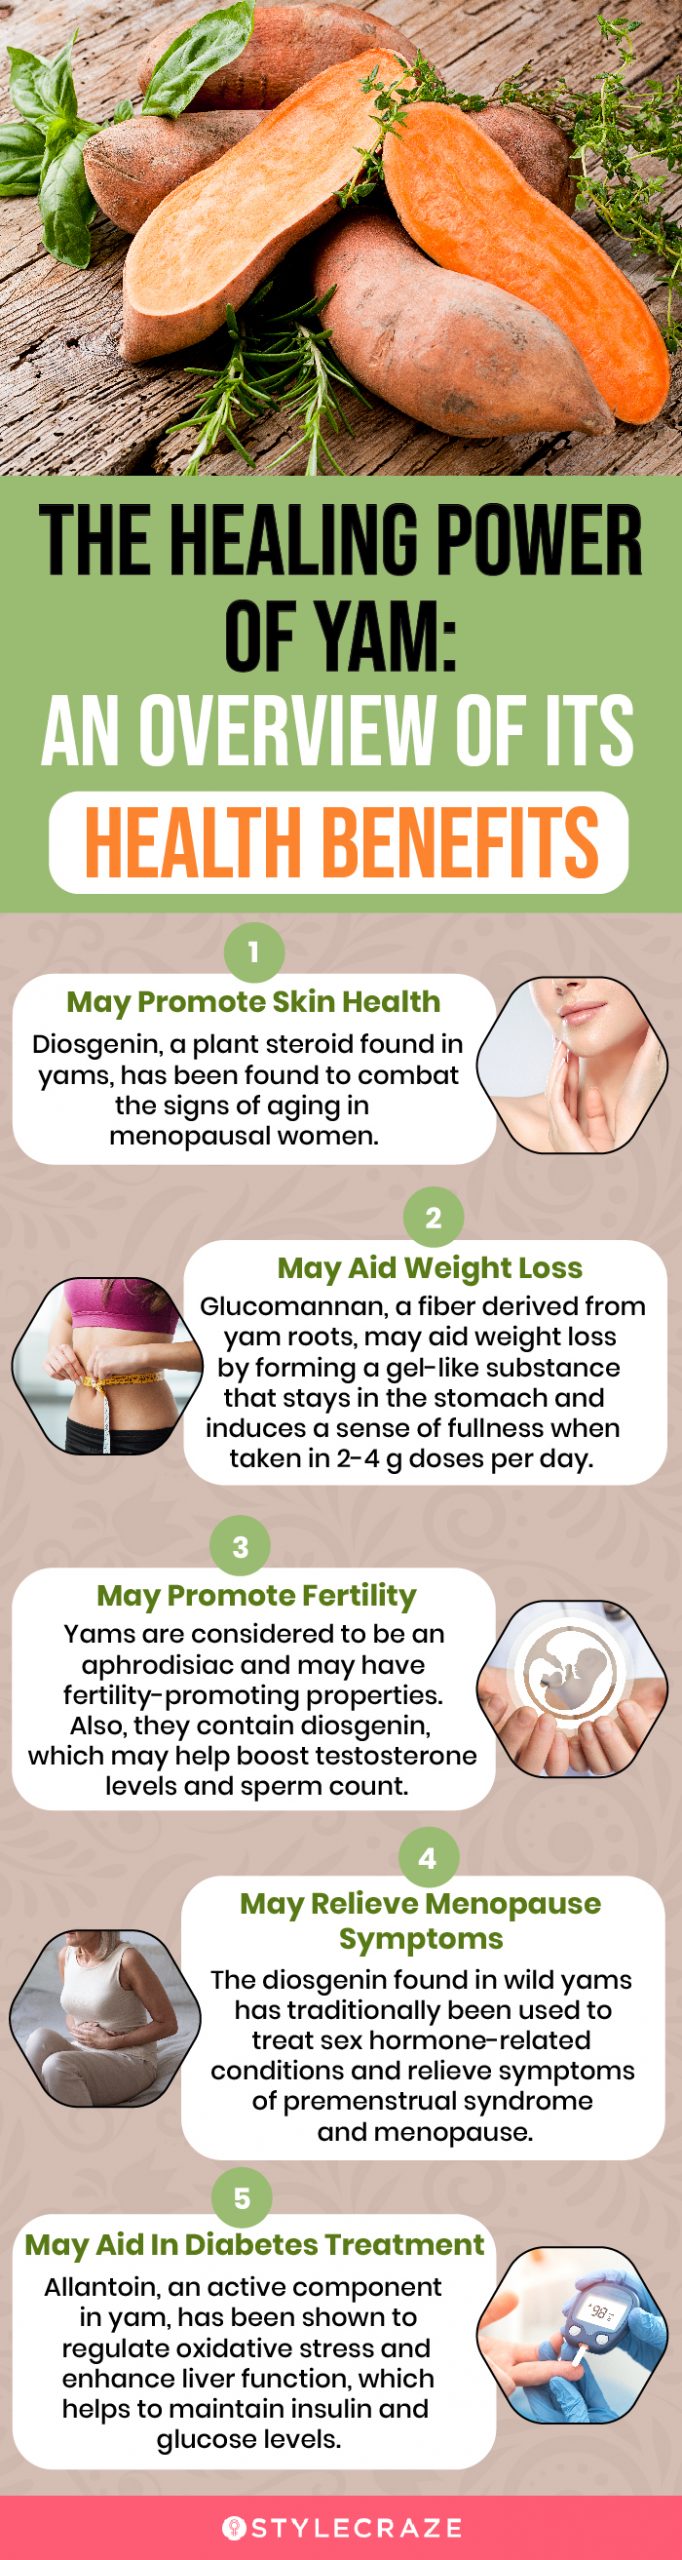 the healing power of yams(infographic)